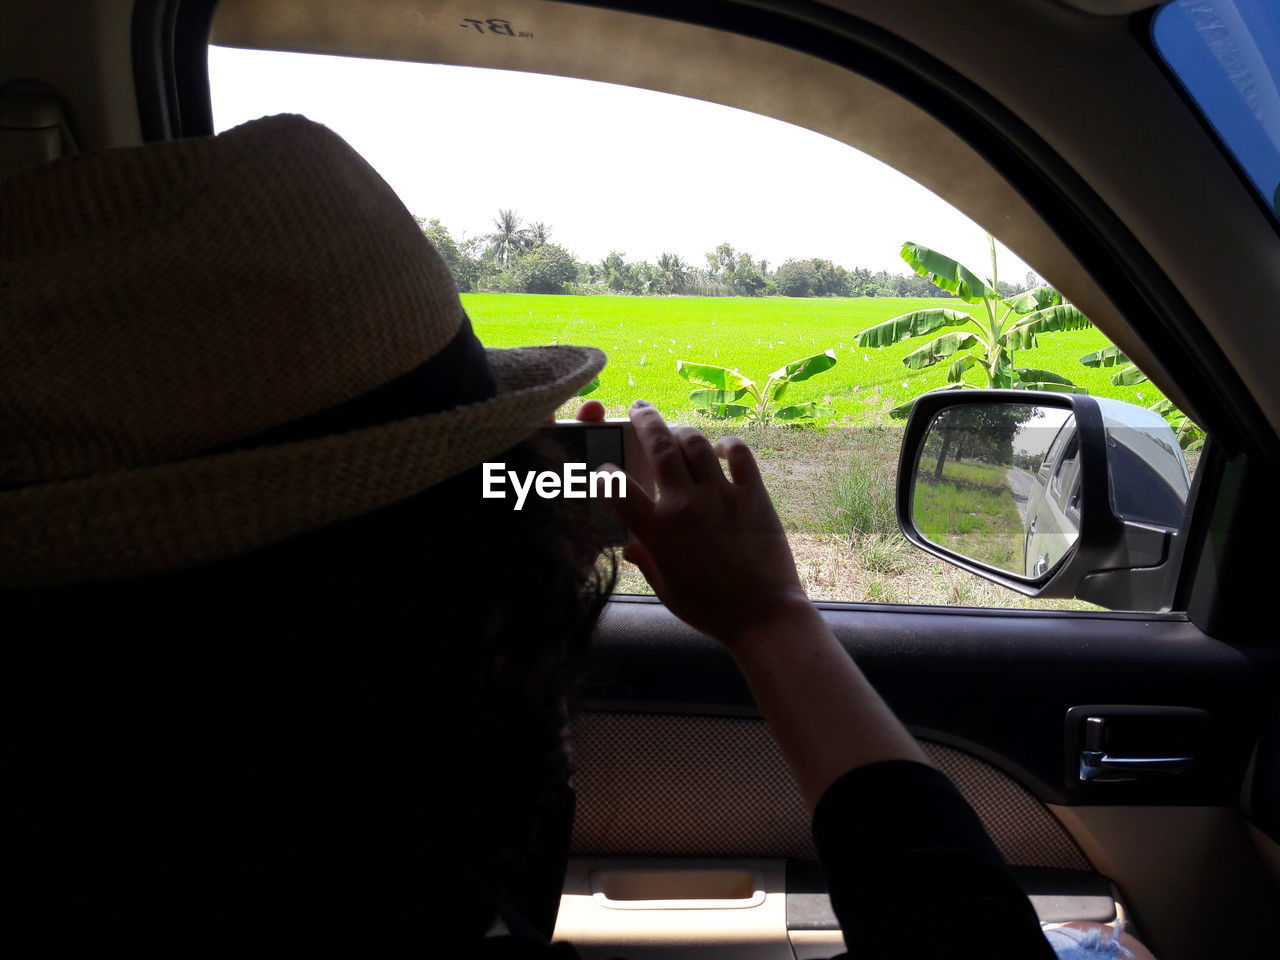 Woman photographing field while traveling in car